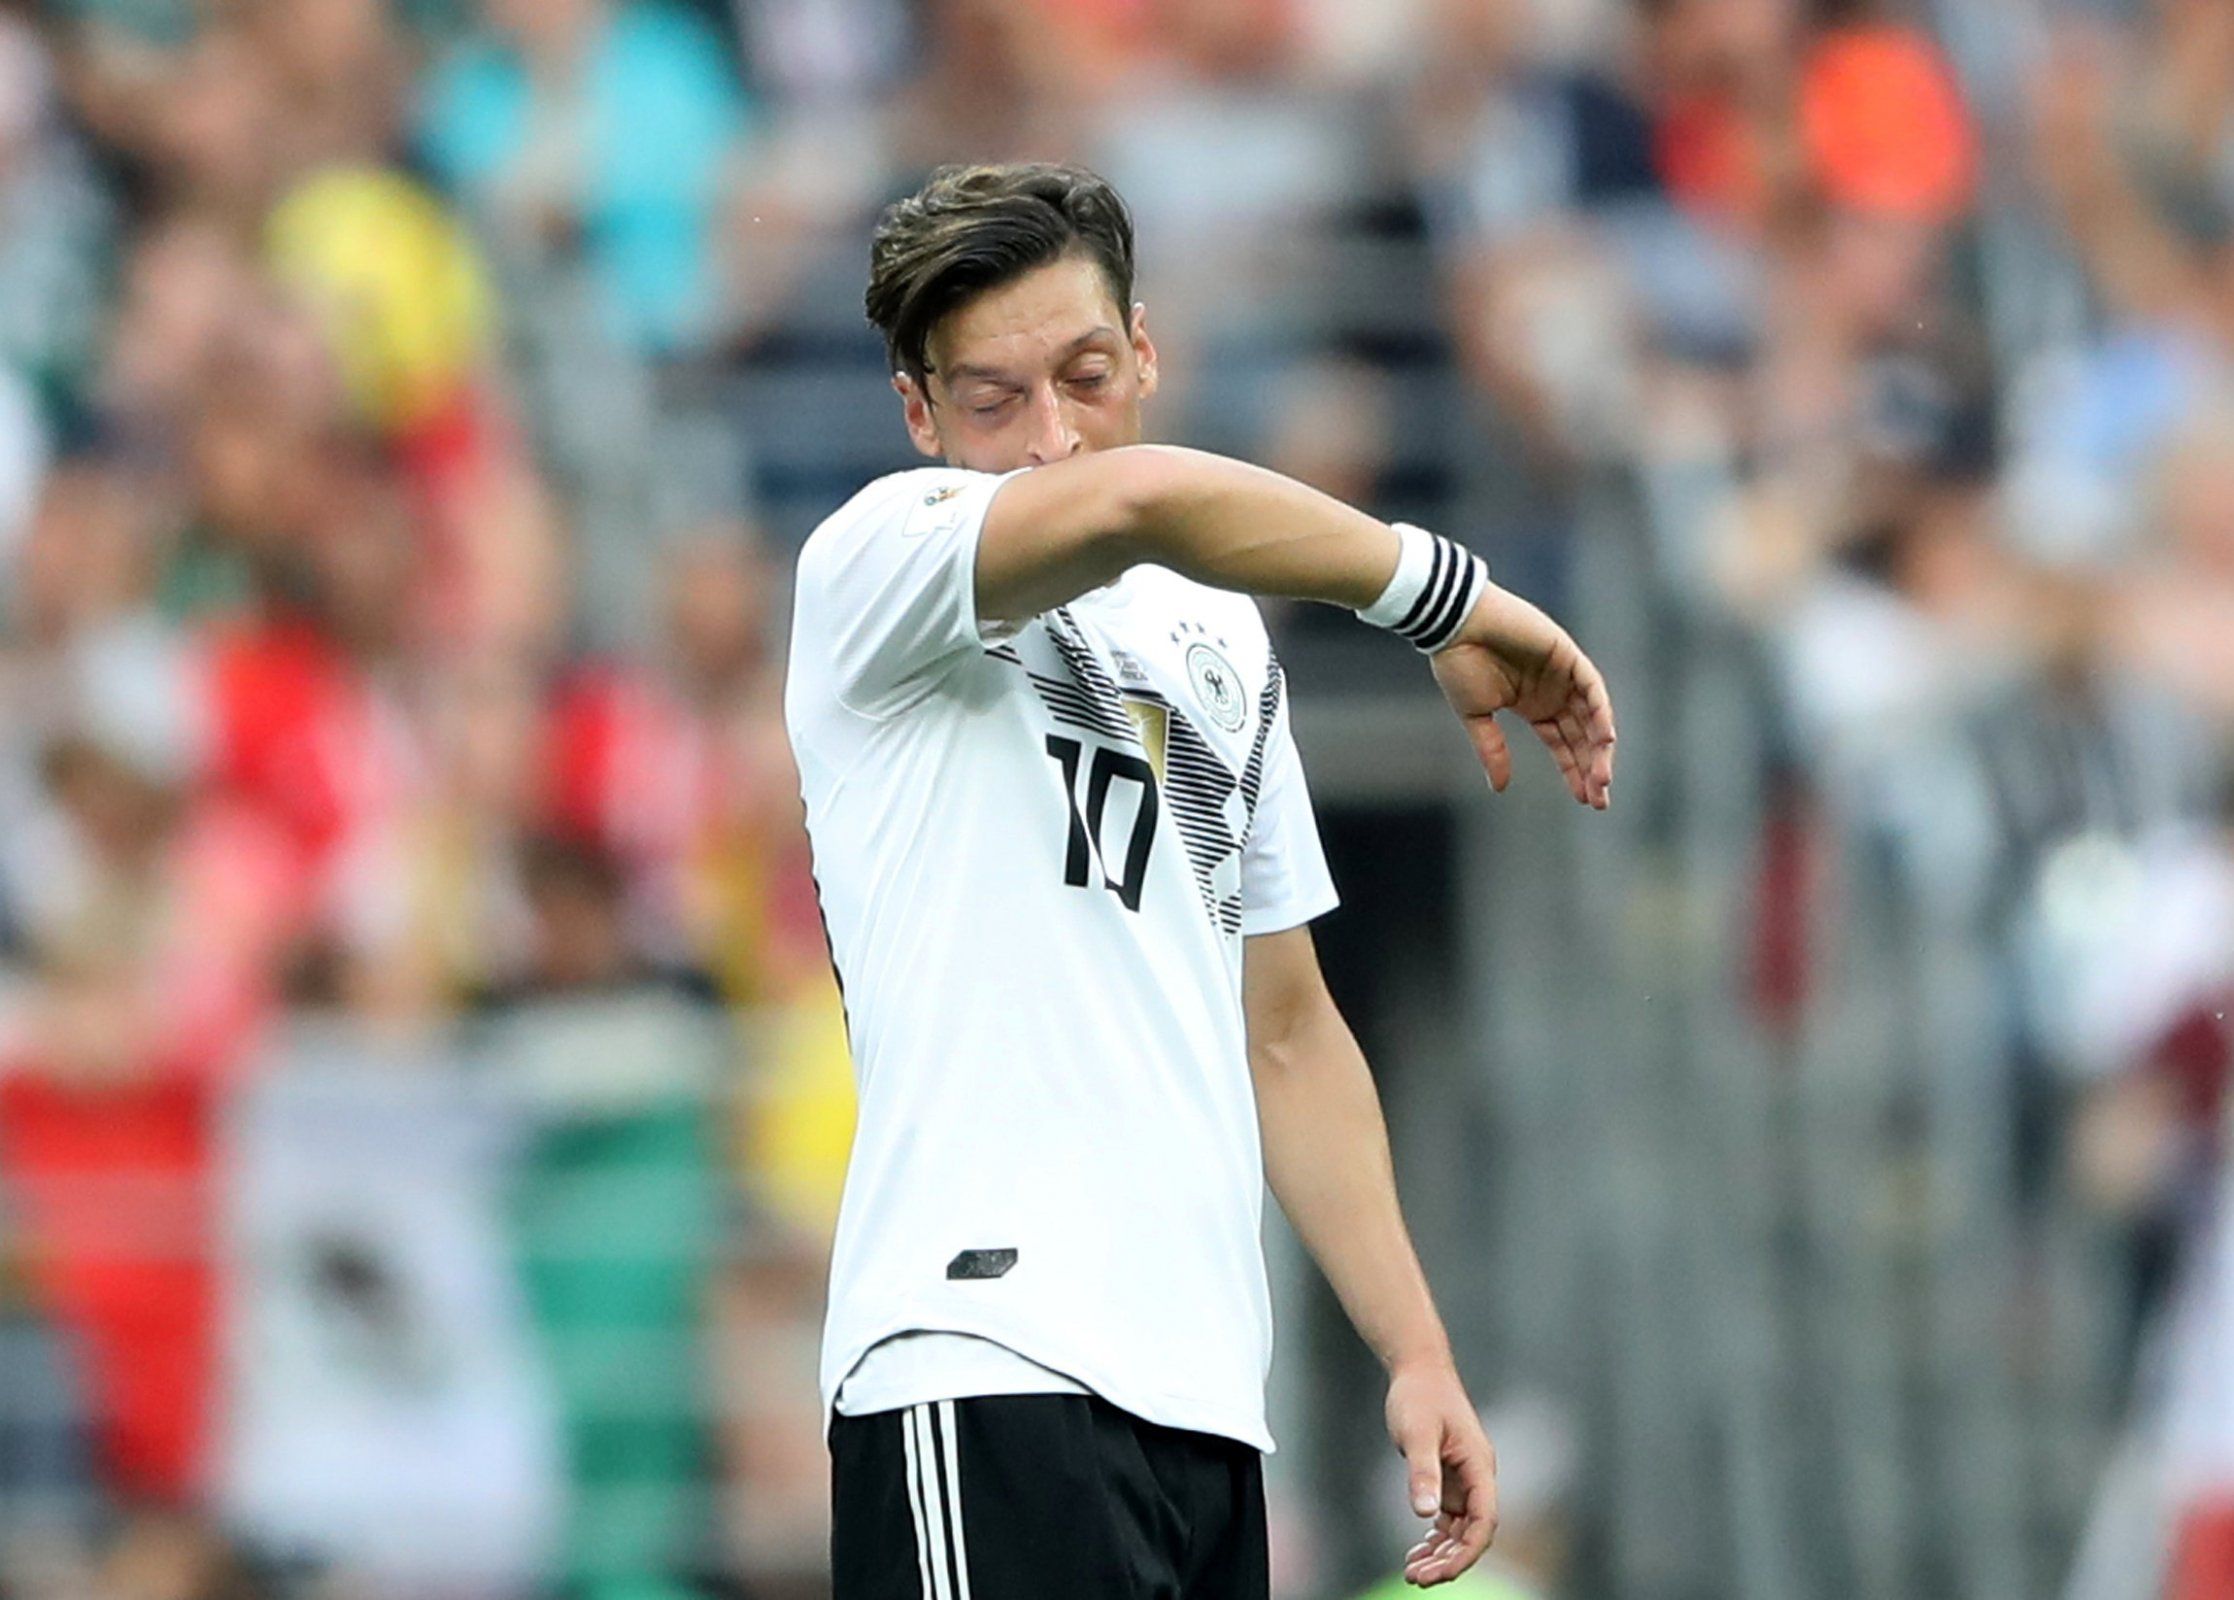 Mesut Ozil in action for Germany in their World Cup clash against Mexico